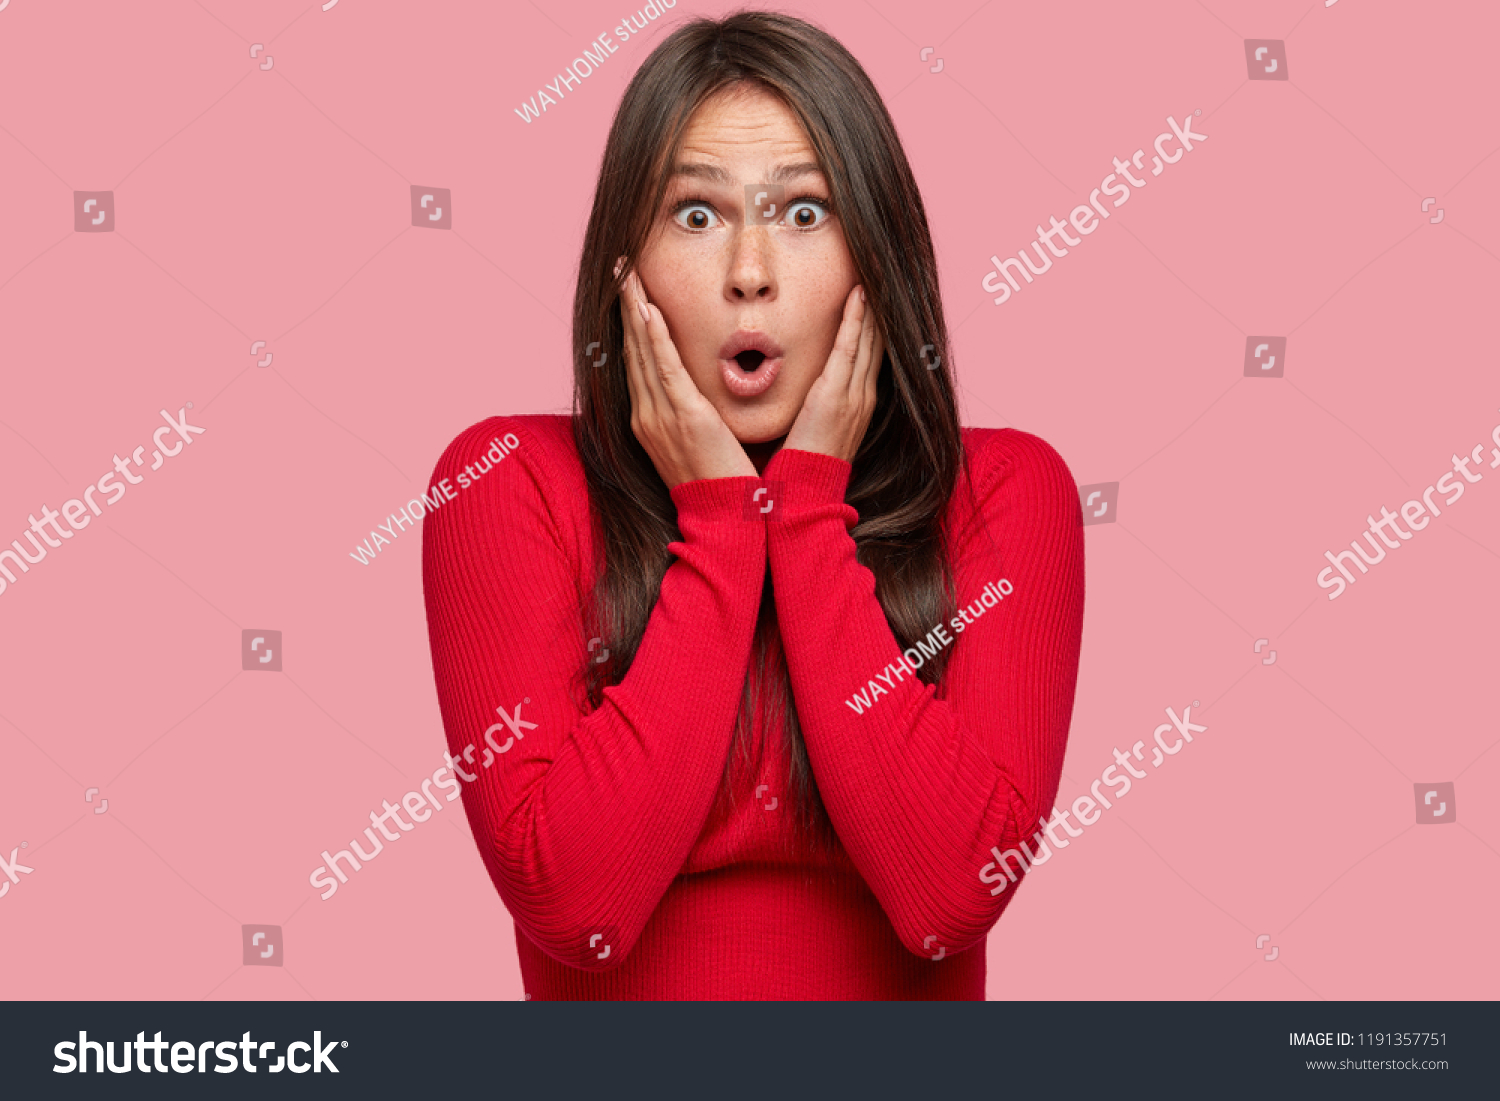 Frightened Scared Woman Looks Terrified Expression Stock Photo ...